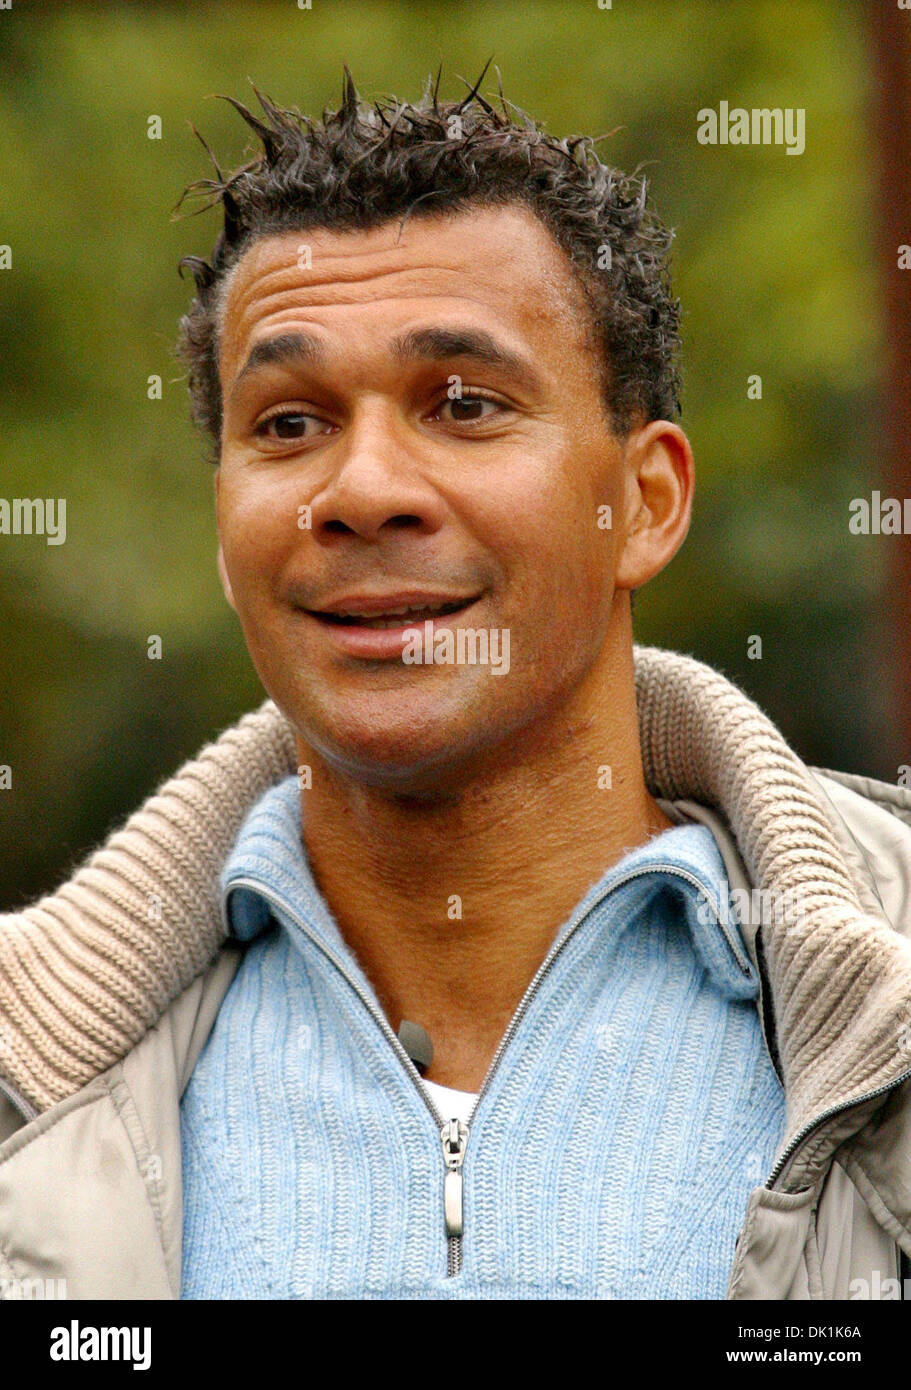 Jan 24, 2011 - St Petersburg, Russia - FILE PHOTO. RUUD GULLIT, a former world and European soccer player of the year, will become coach of soccer club FC Terek Grozny in Russia's Chechnya region, citing comments from the republic's leader R. Kadyrov. The former Chelsea and Newcastle manager Ruud Gullit will coach Terek Grozny on an 18-month contract, the Chechnya based club. PICTU Stock Photo